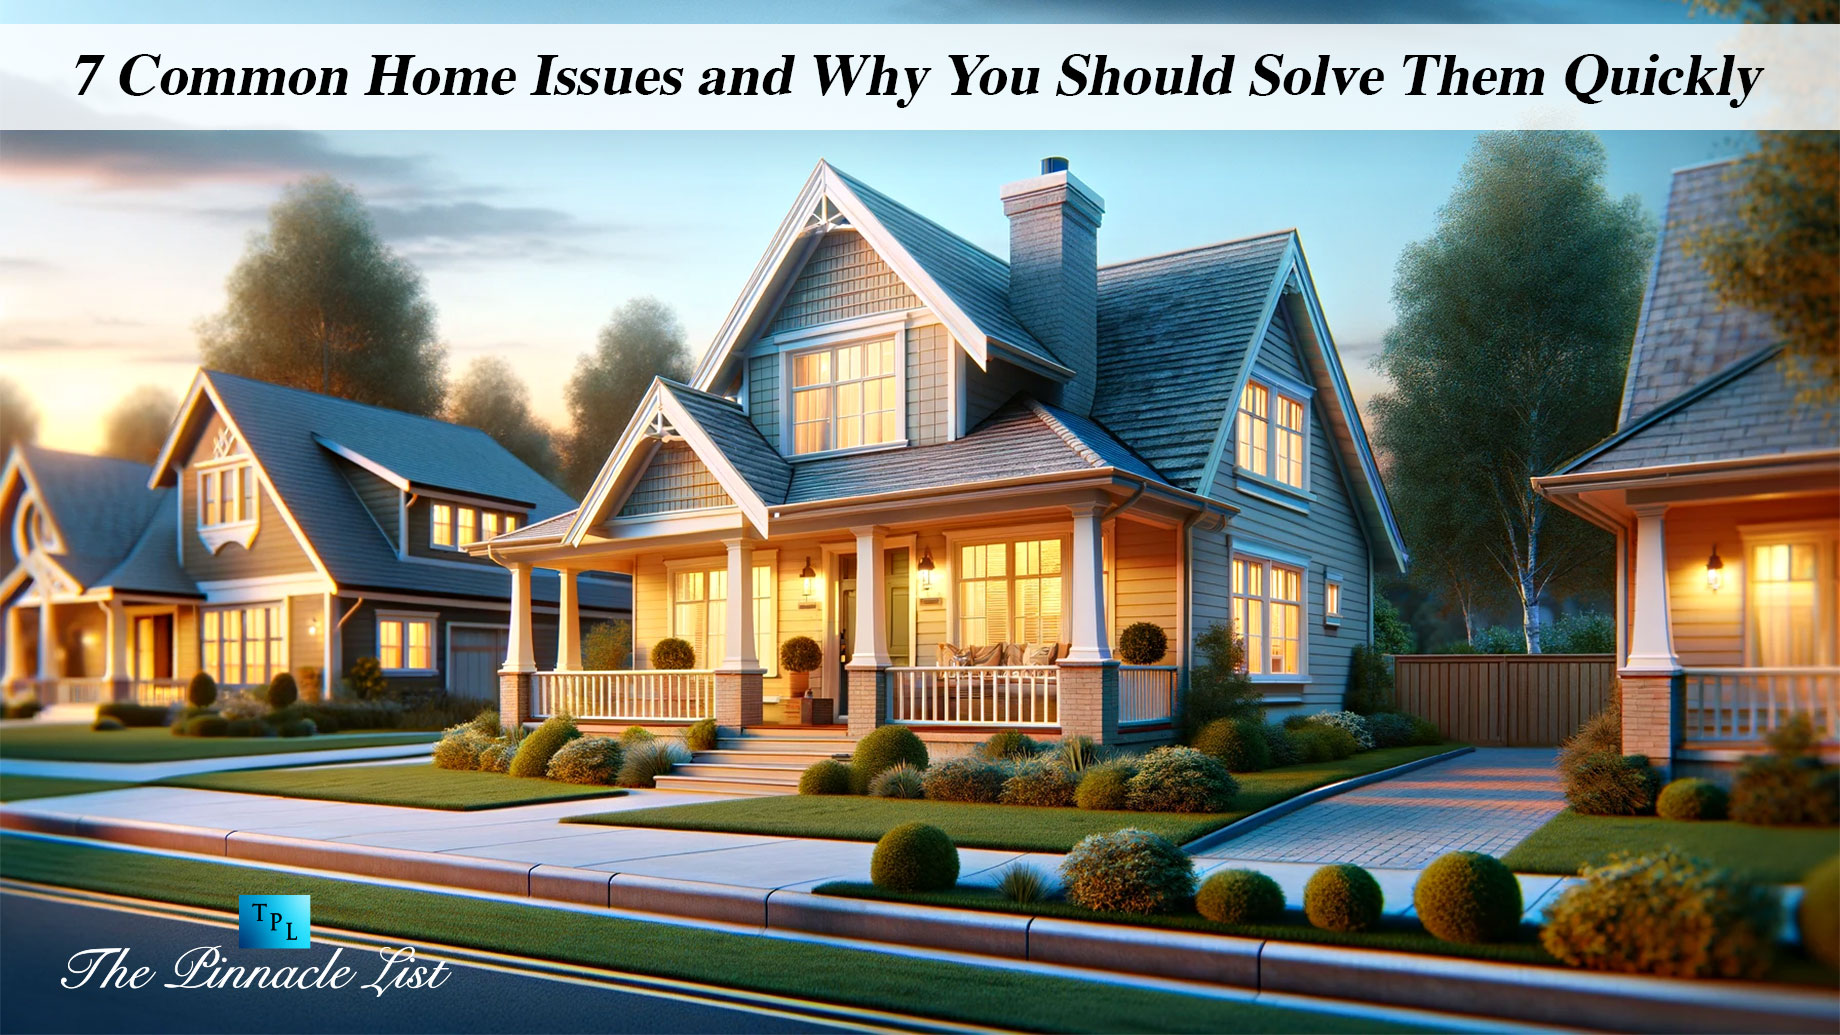 7 Common Home Issues and Why You Should Solve Them Quickly